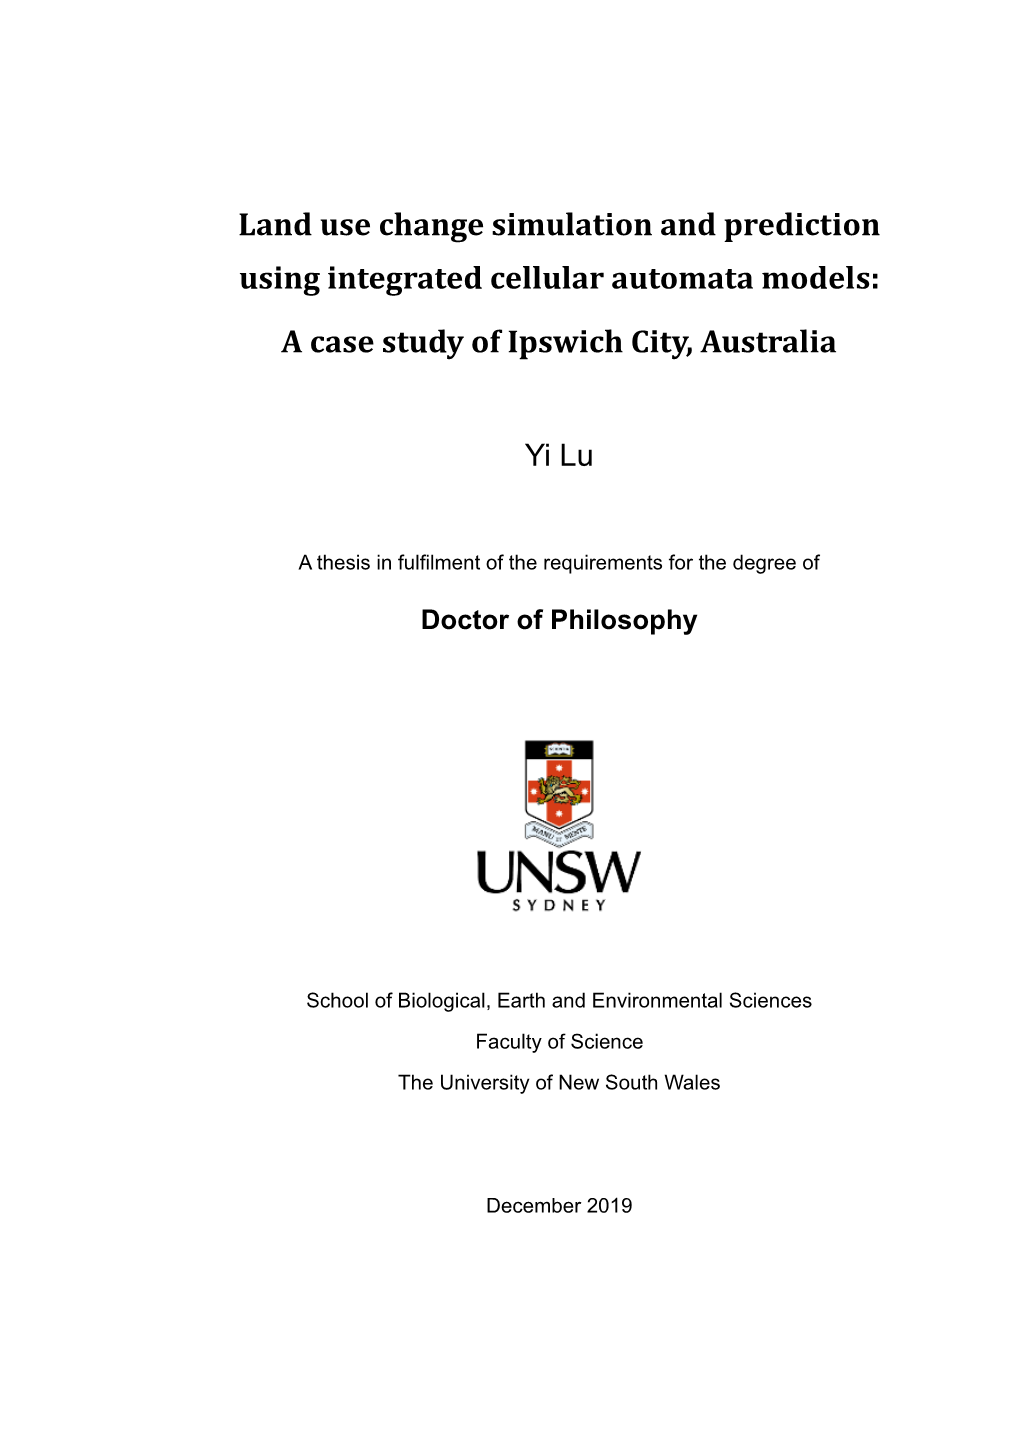 Land Use Change Simulation and Prediction Using Integrated Cellular Automata Models: a Case Study of Ipswich City, Australia